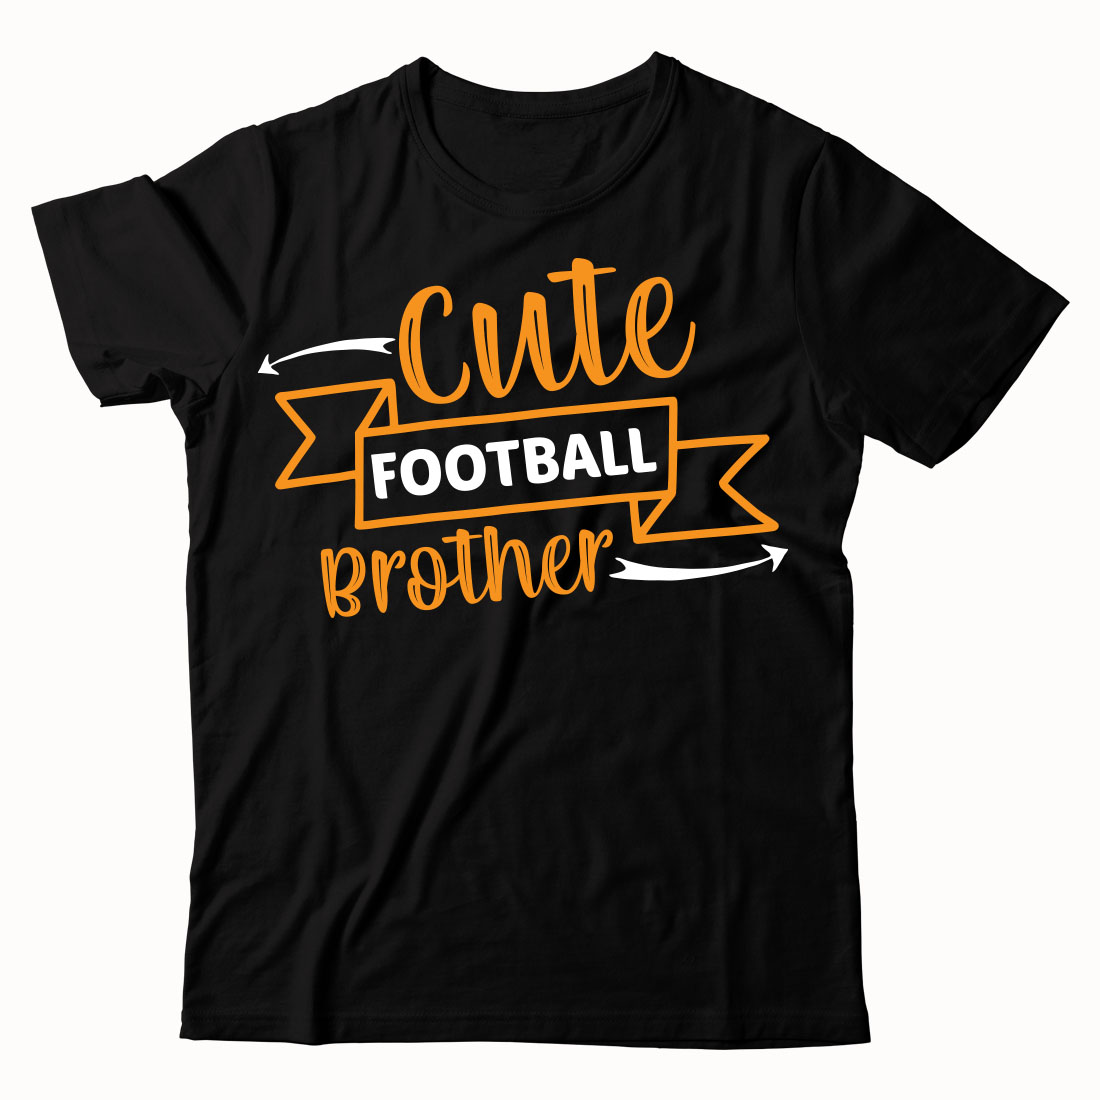 Black shirt that says cute football brother.